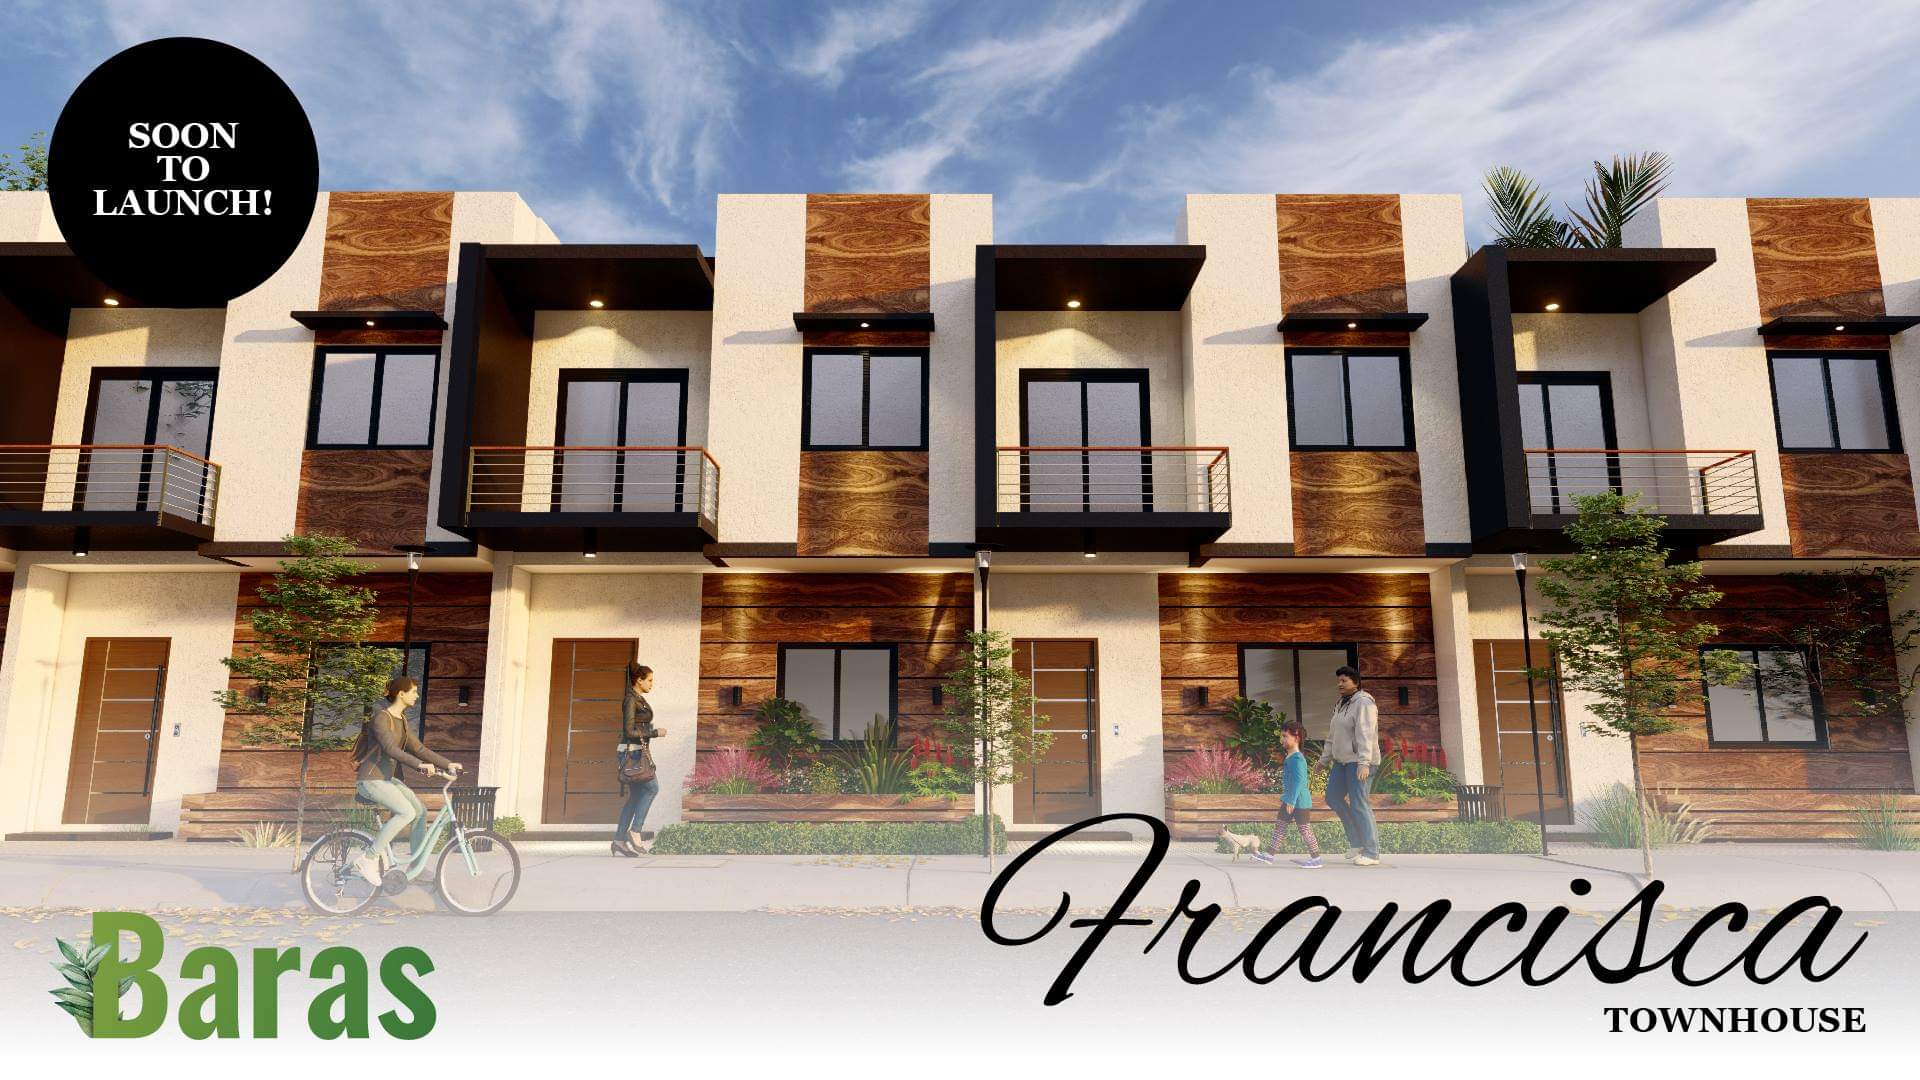 P2,781/month House and lot in Baras Rizal!